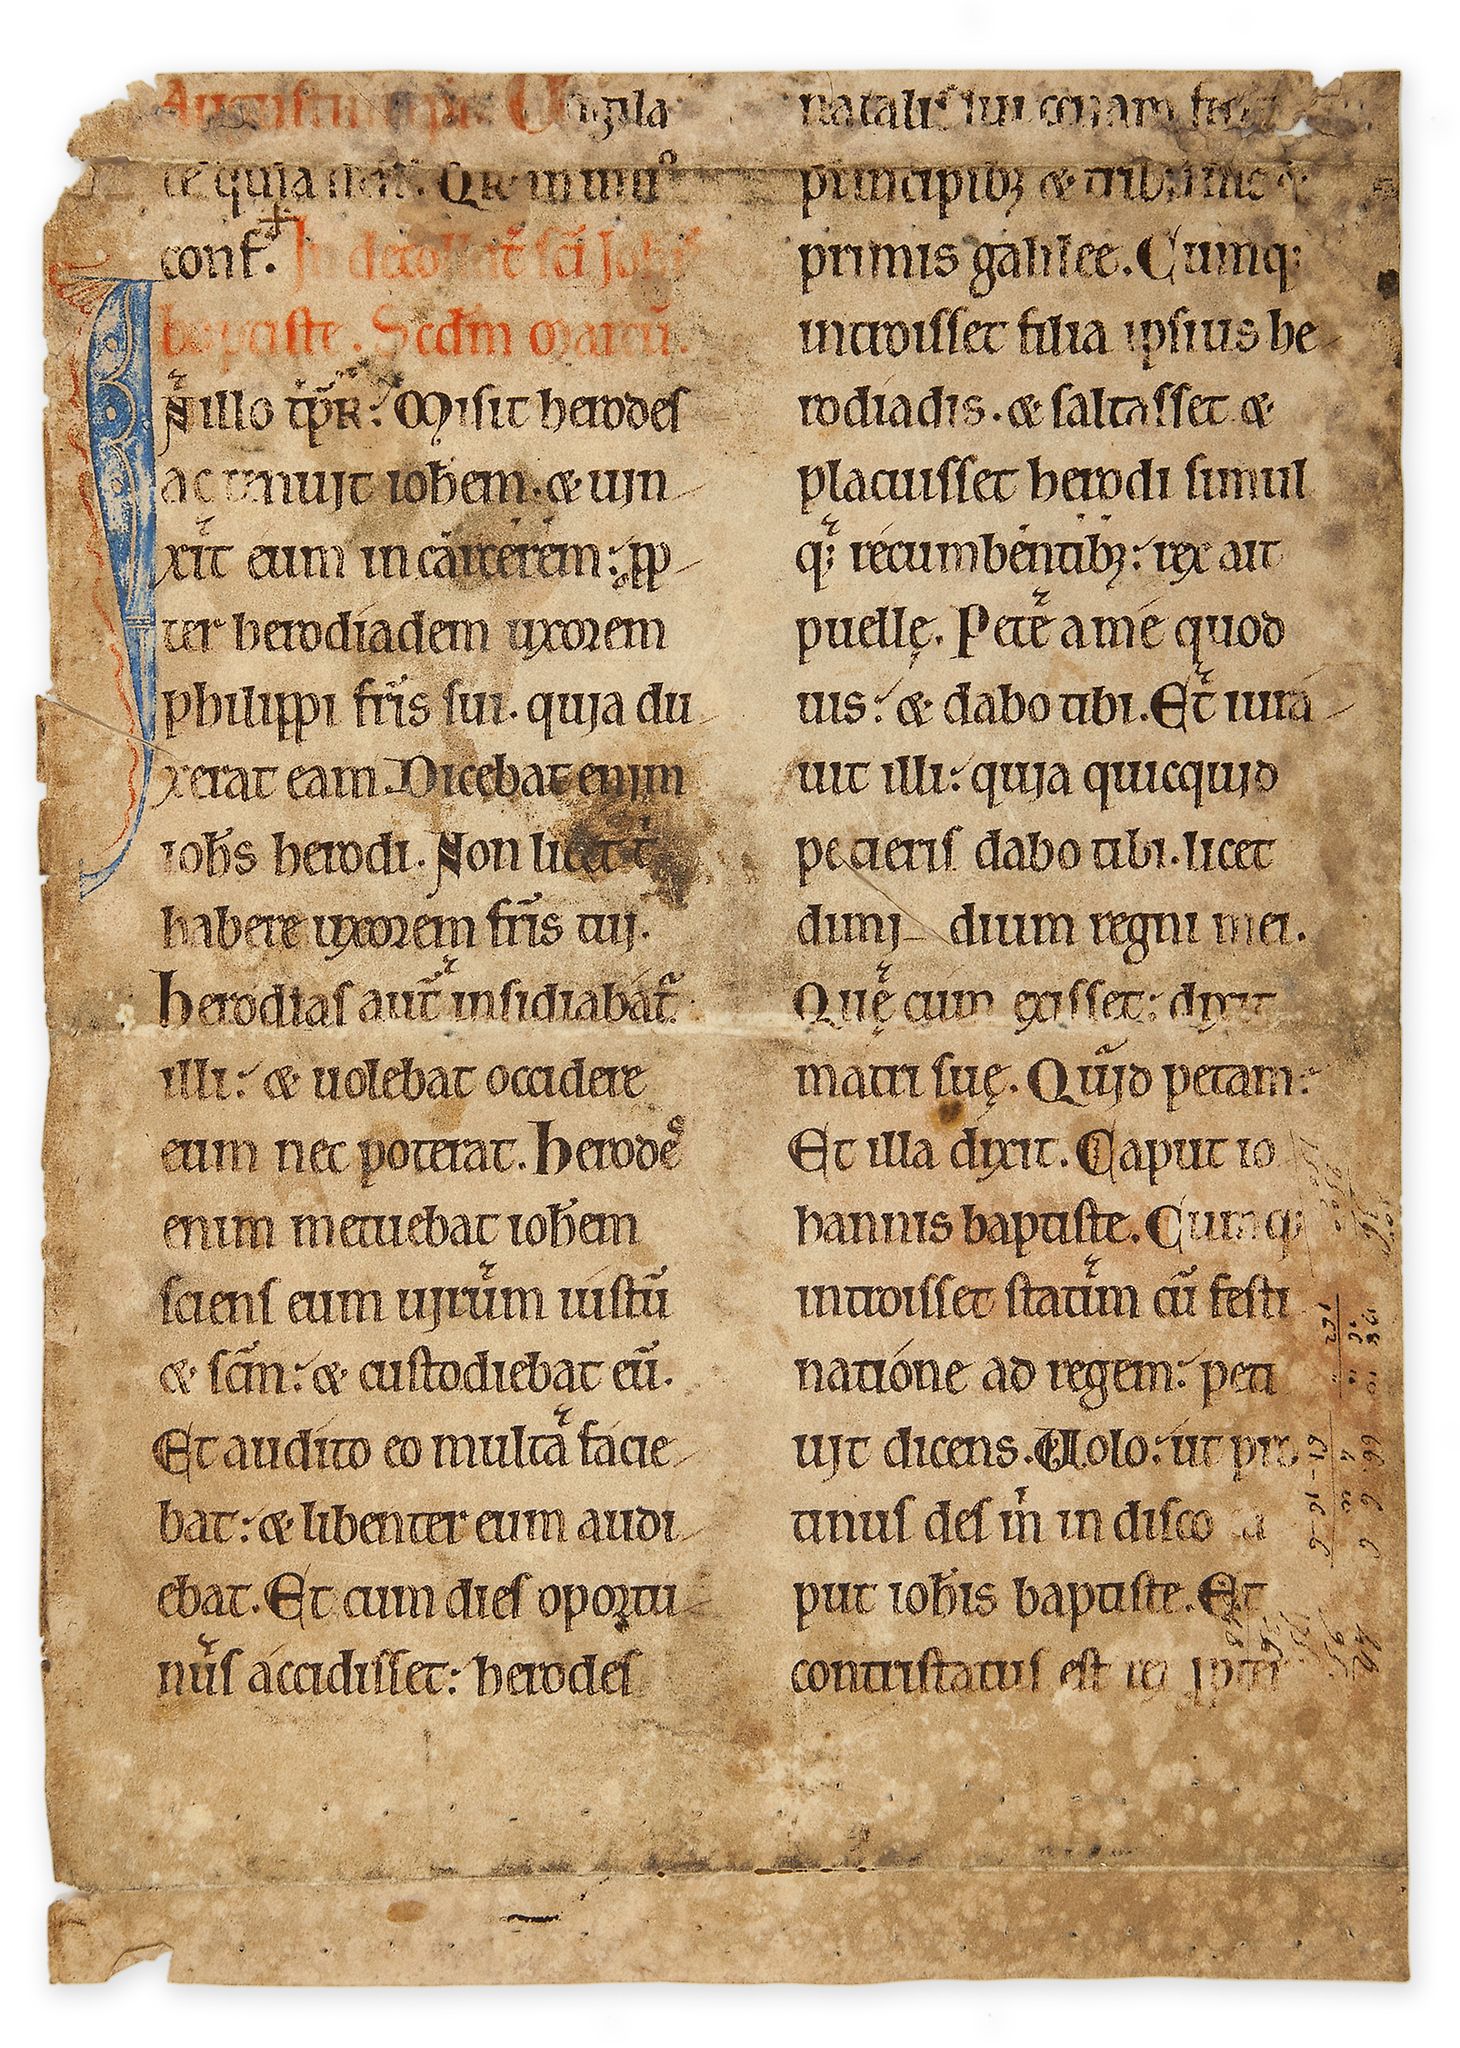 Leaf from a decorated Romanesque Lectionary, - in Latin on parchment [Low Countries or northern